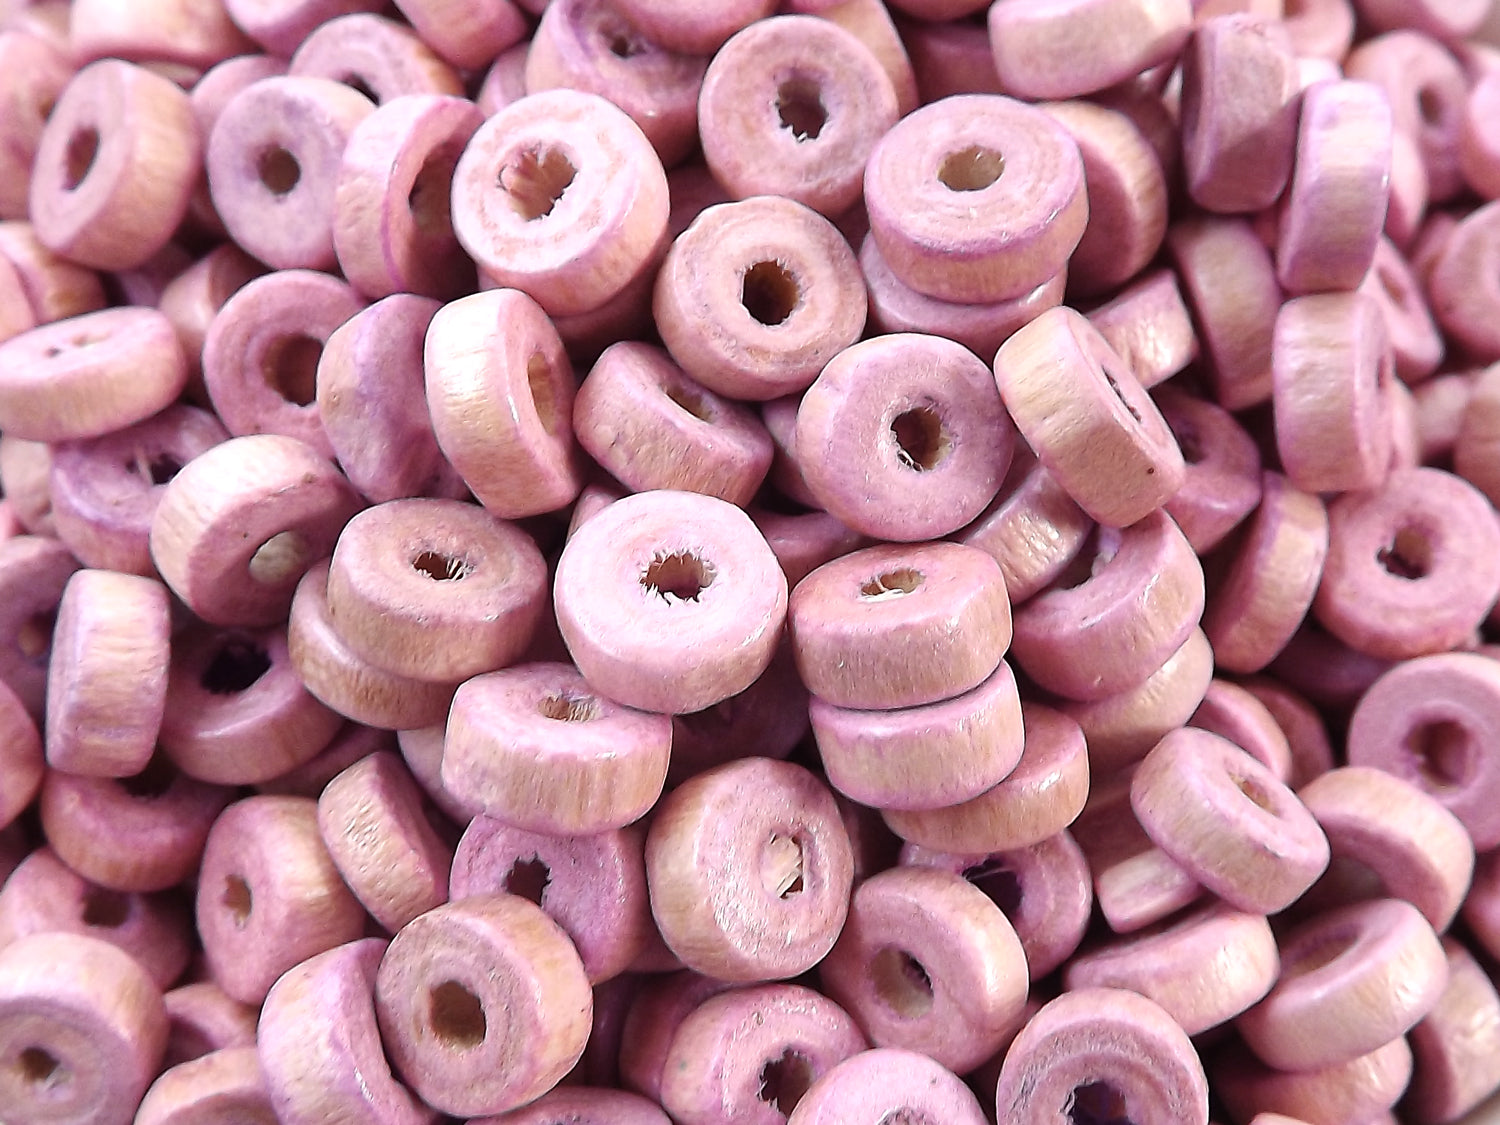 Powder Pink Round Rondelle Heishi Wood Beads Satin Varnished Plain Simple Round Smooth Ball Bead Spacers 8mm Choose 50pcs, 200pcs or 400pcs